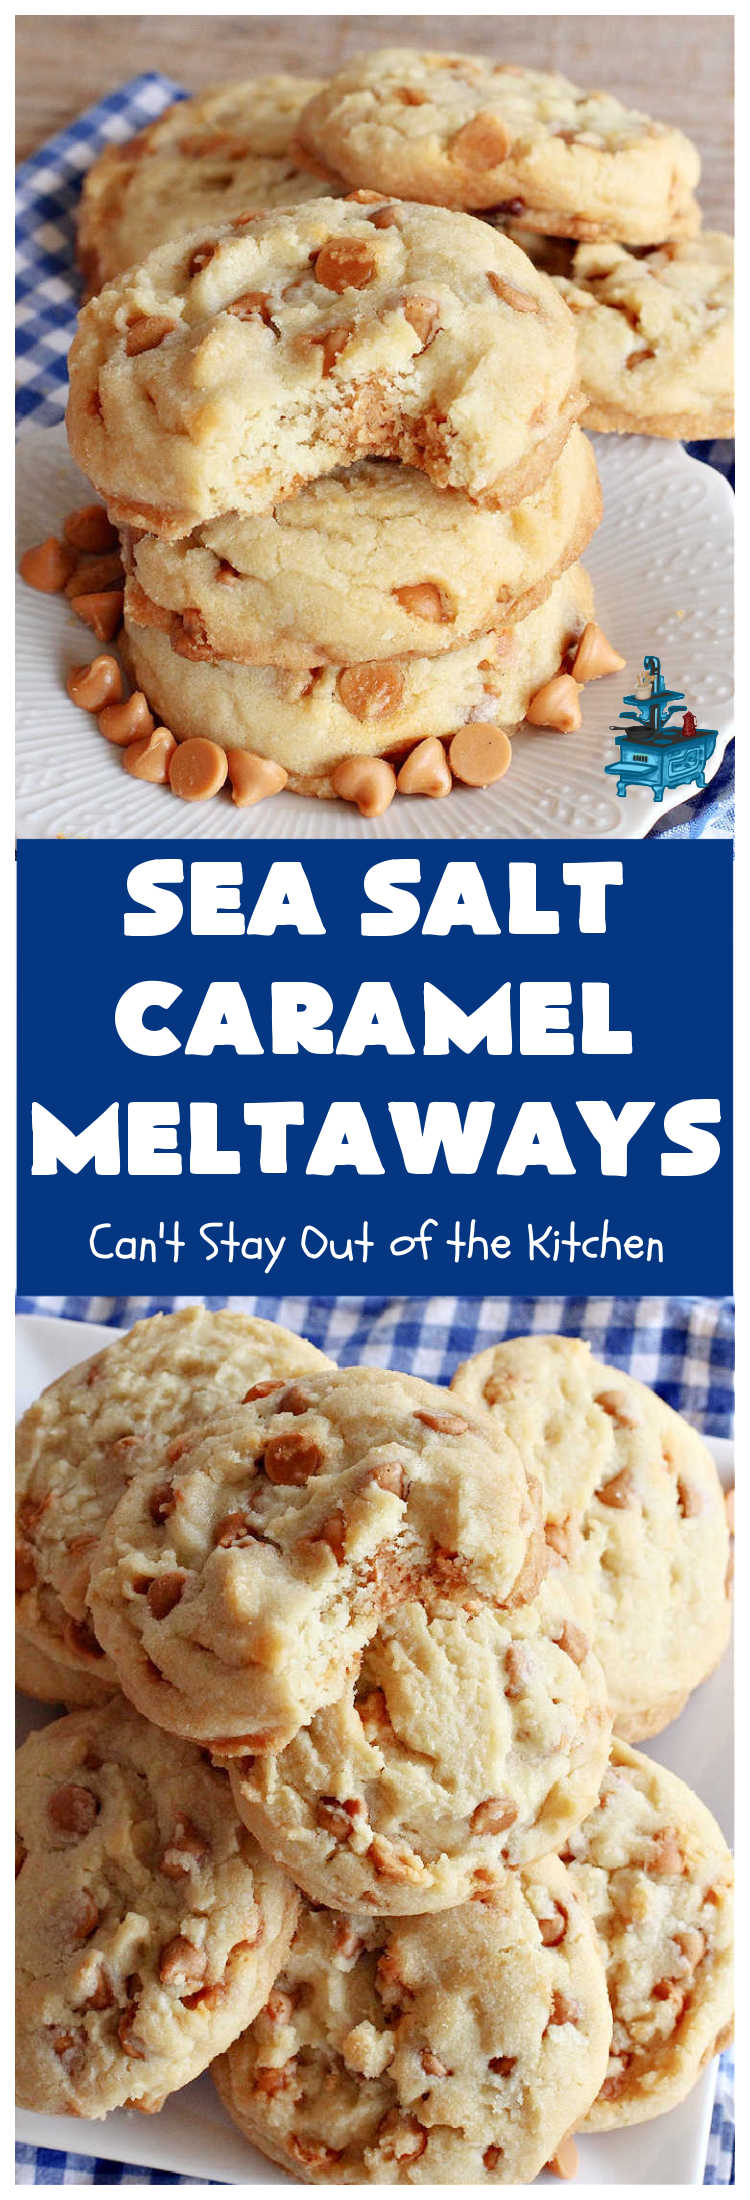 Sea Salt Caramel Meltaways | Can't Stay Out of the Kitchen